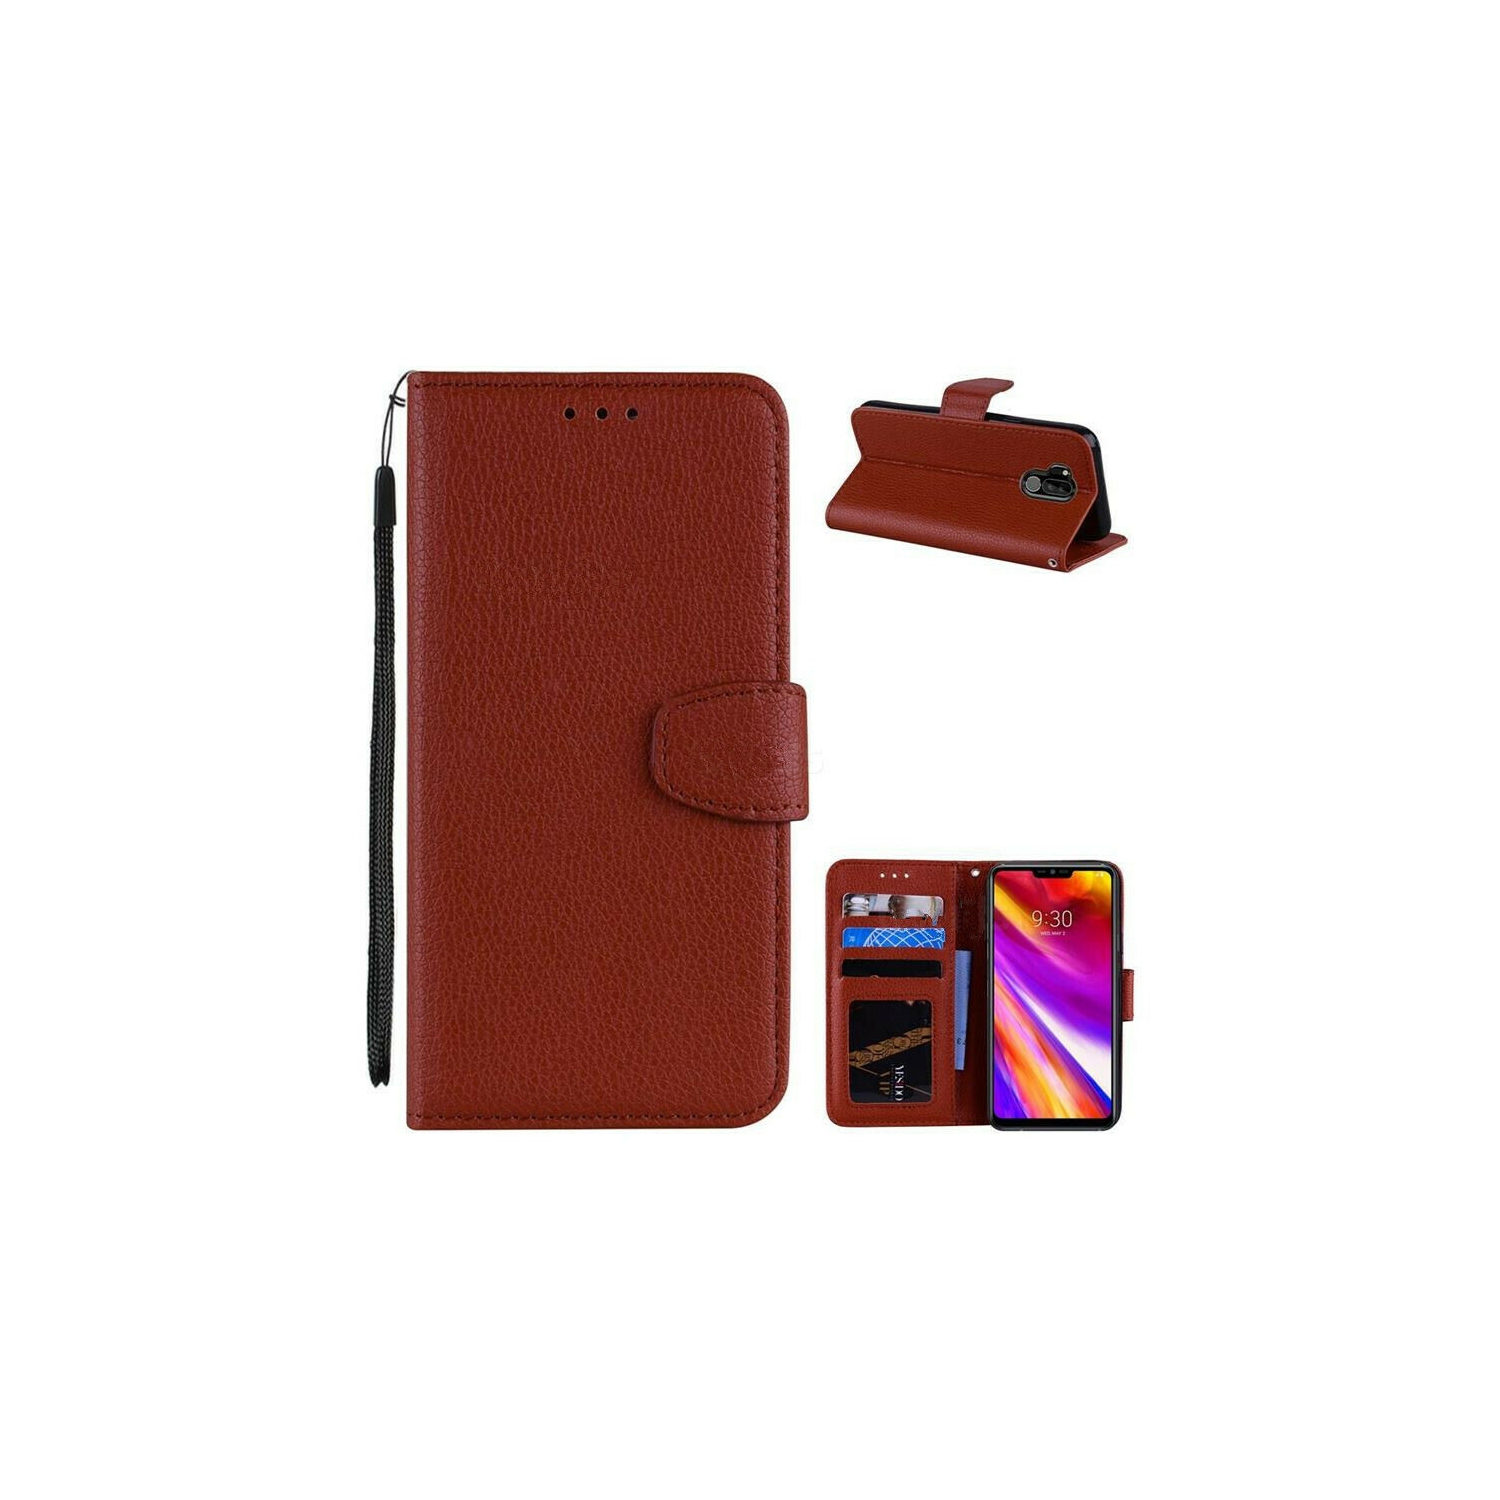 【CSmart】 Magnetic Card Slot Leather Folio Wallet Flip Case Cover for LG G7 ThinQ / G7 One, Brown